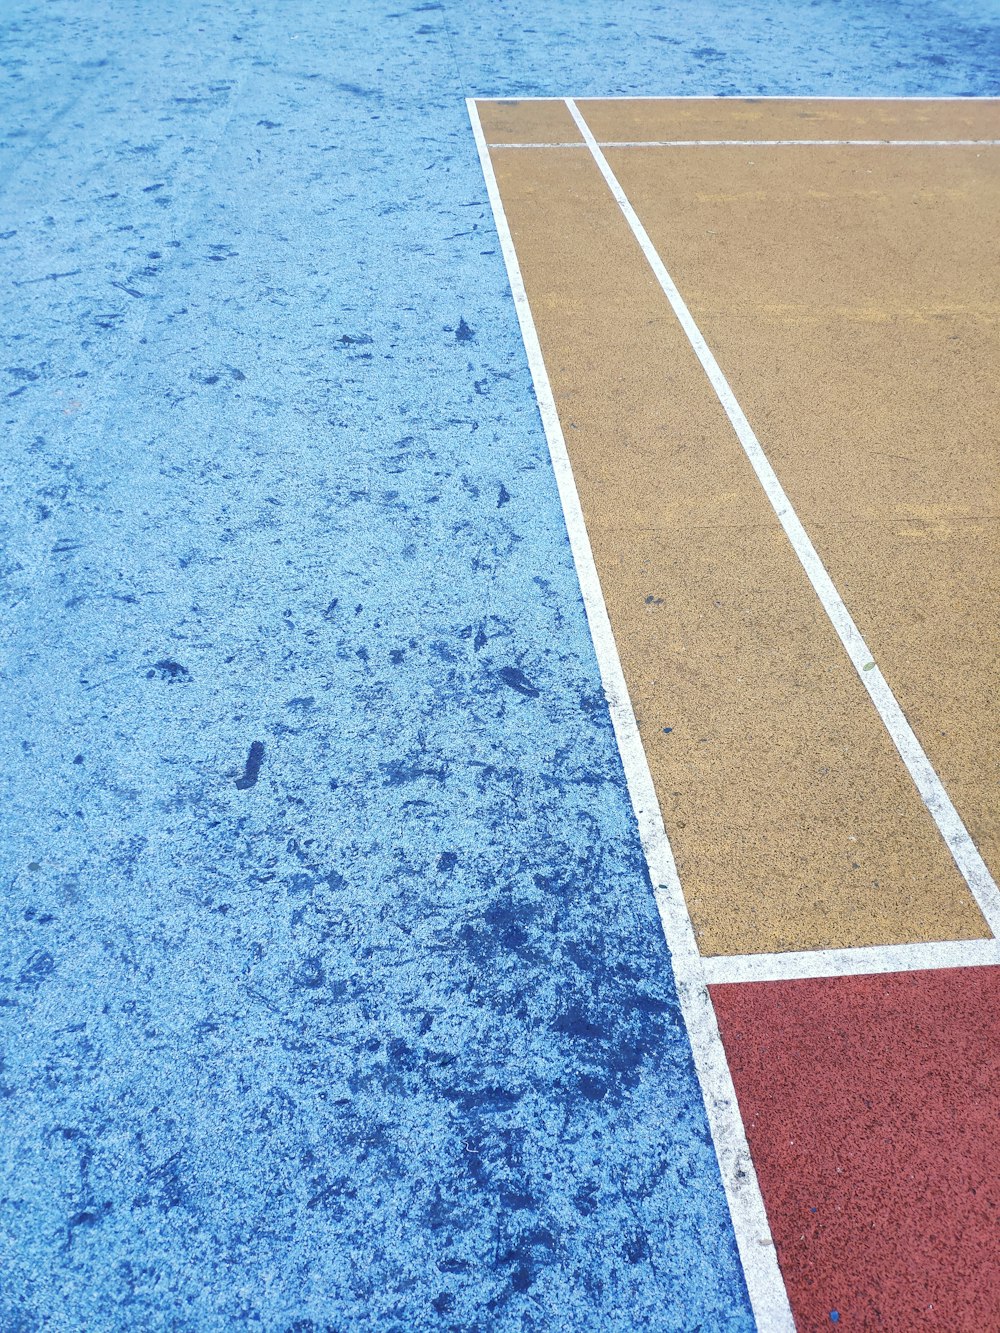 a tennis court with a red and yellow line on it